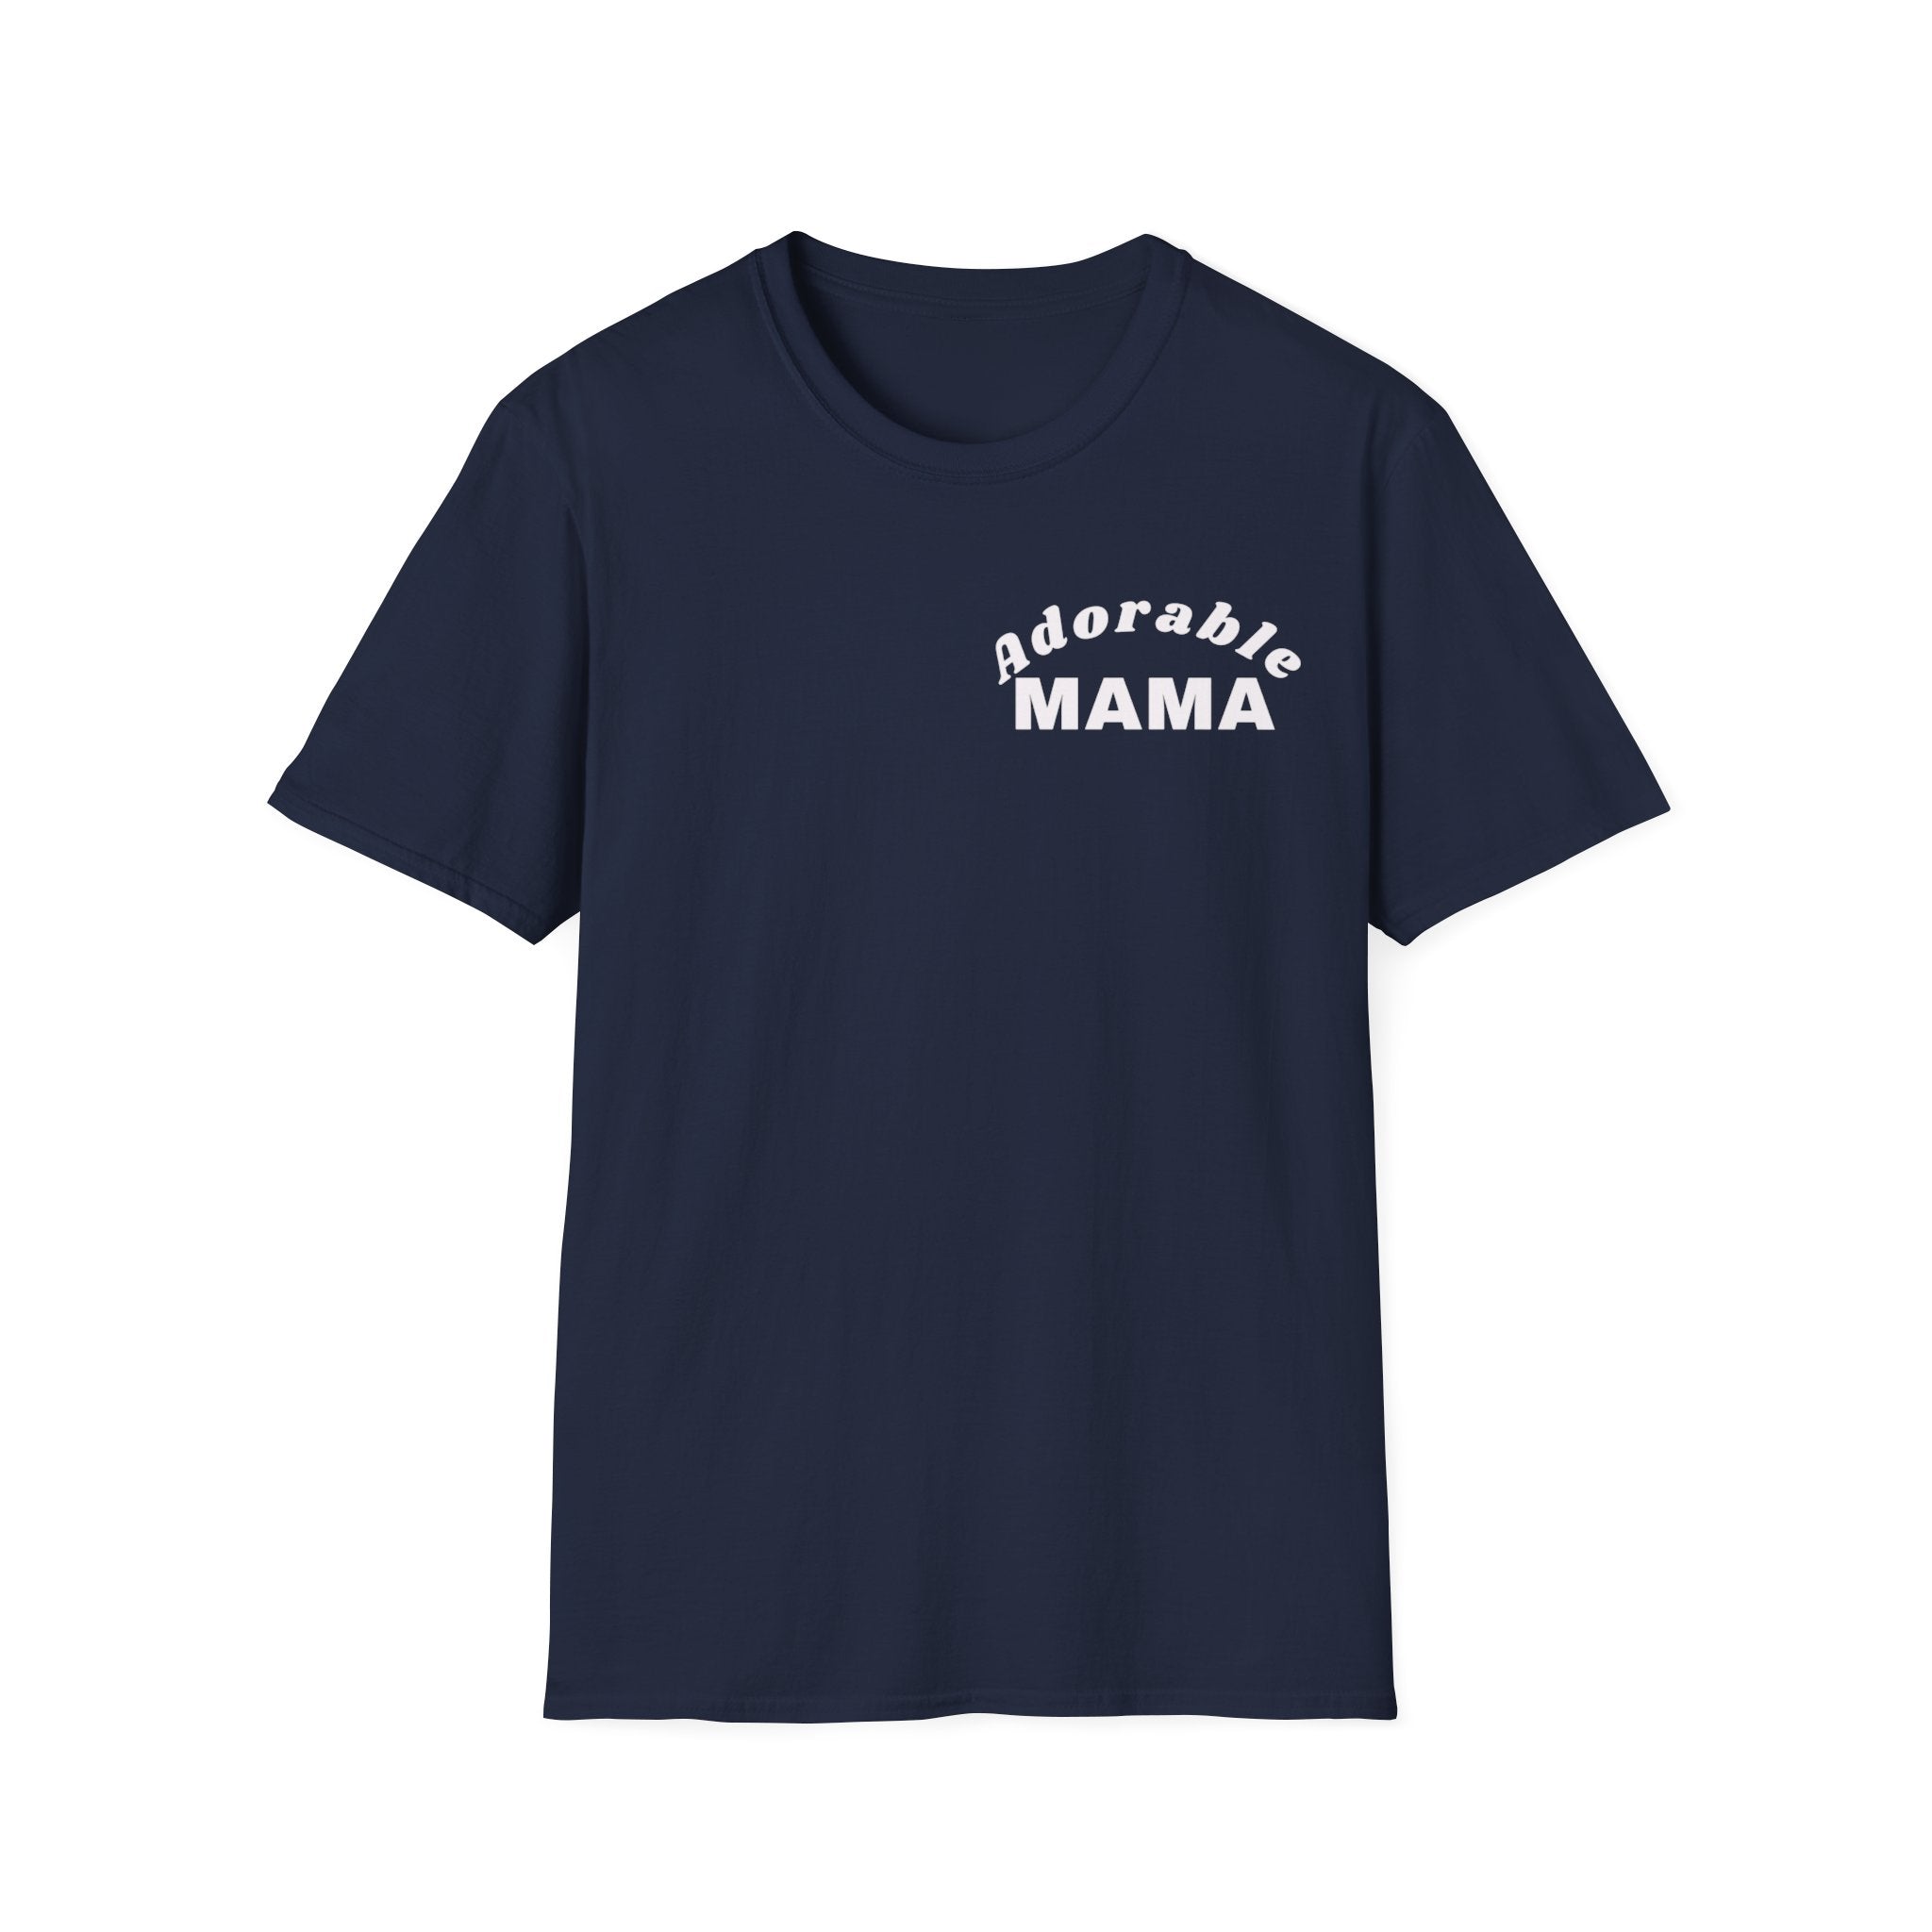 Adorable Mama Unisex Softstyle Crew Neck T-Shirt, Mom Shirt, Gift for Mom, Mother's Day Gift